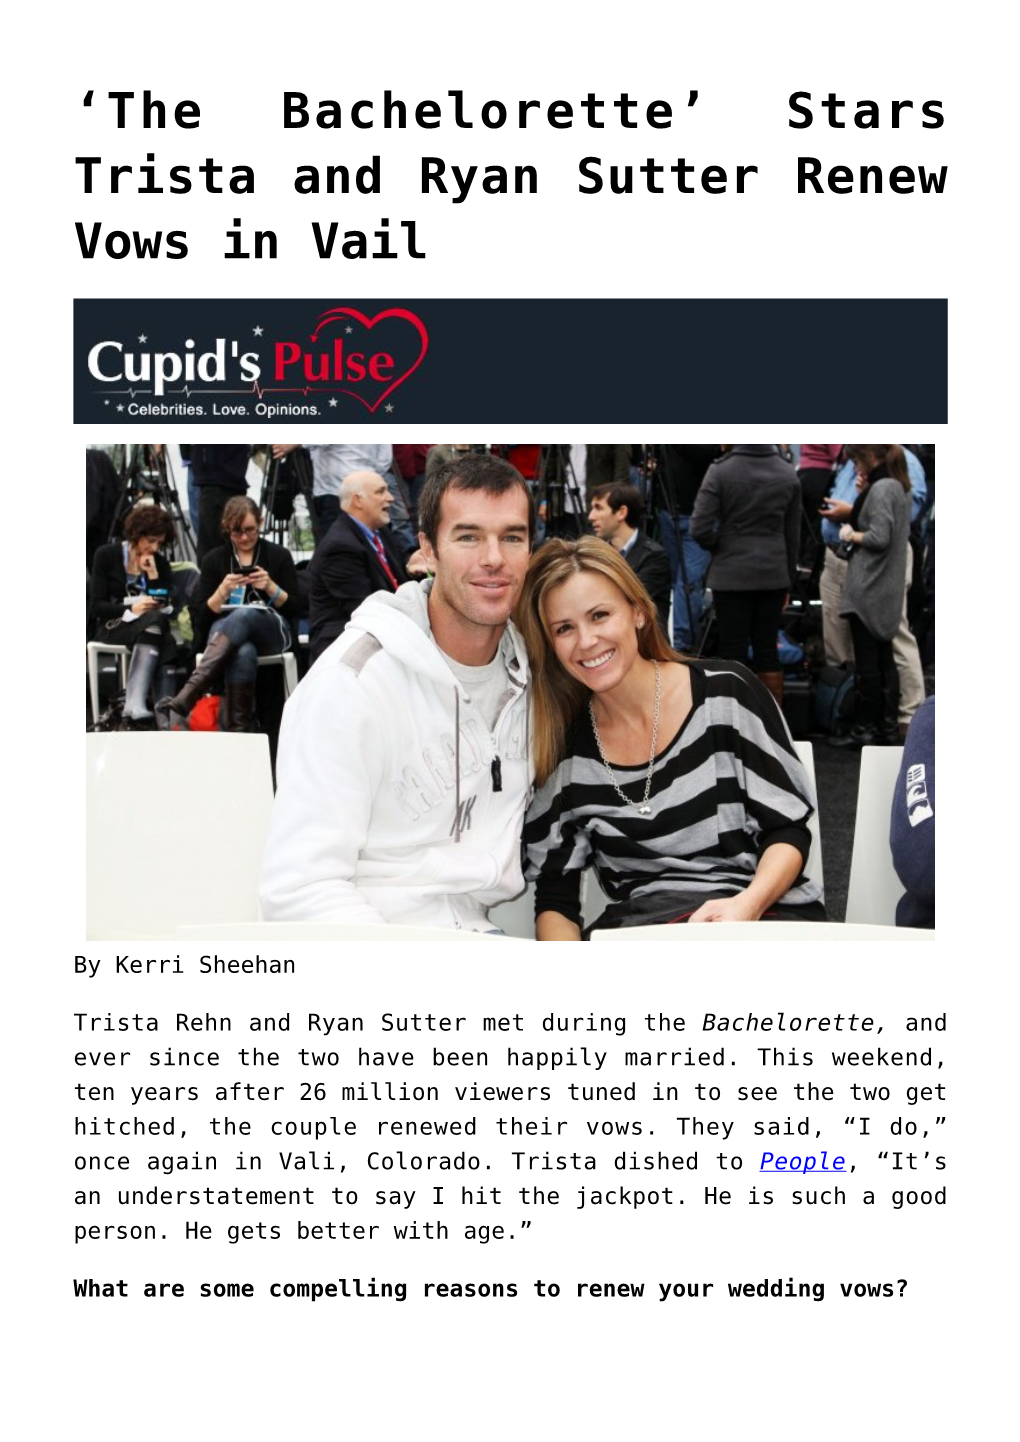 Stars Trista and Ryan Sutter Renew Vows in Vail